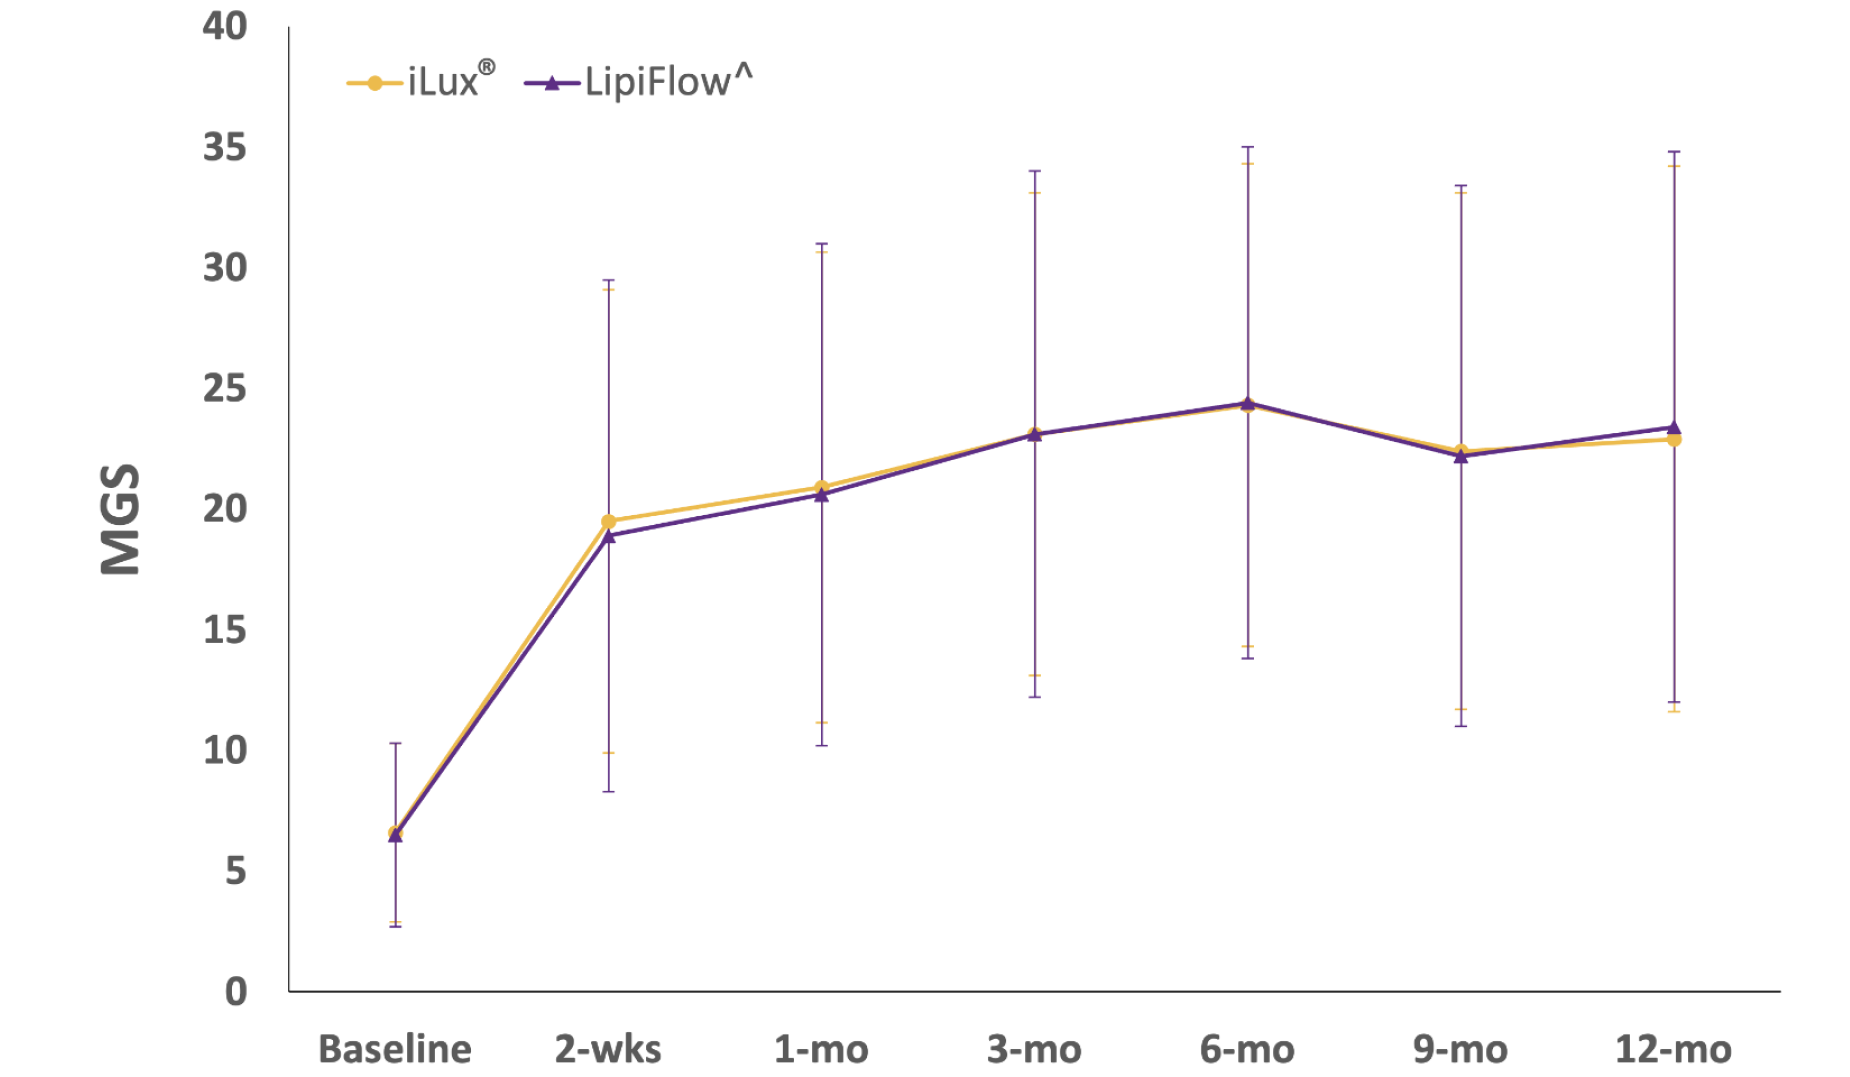 Graph showing comparable Meibomian gland scores (MGS) of iLux and LipiFlow over a 12 month time period (scores at baseline, 2 weeks and 1, 3, 6, 9, and 12 month marks)